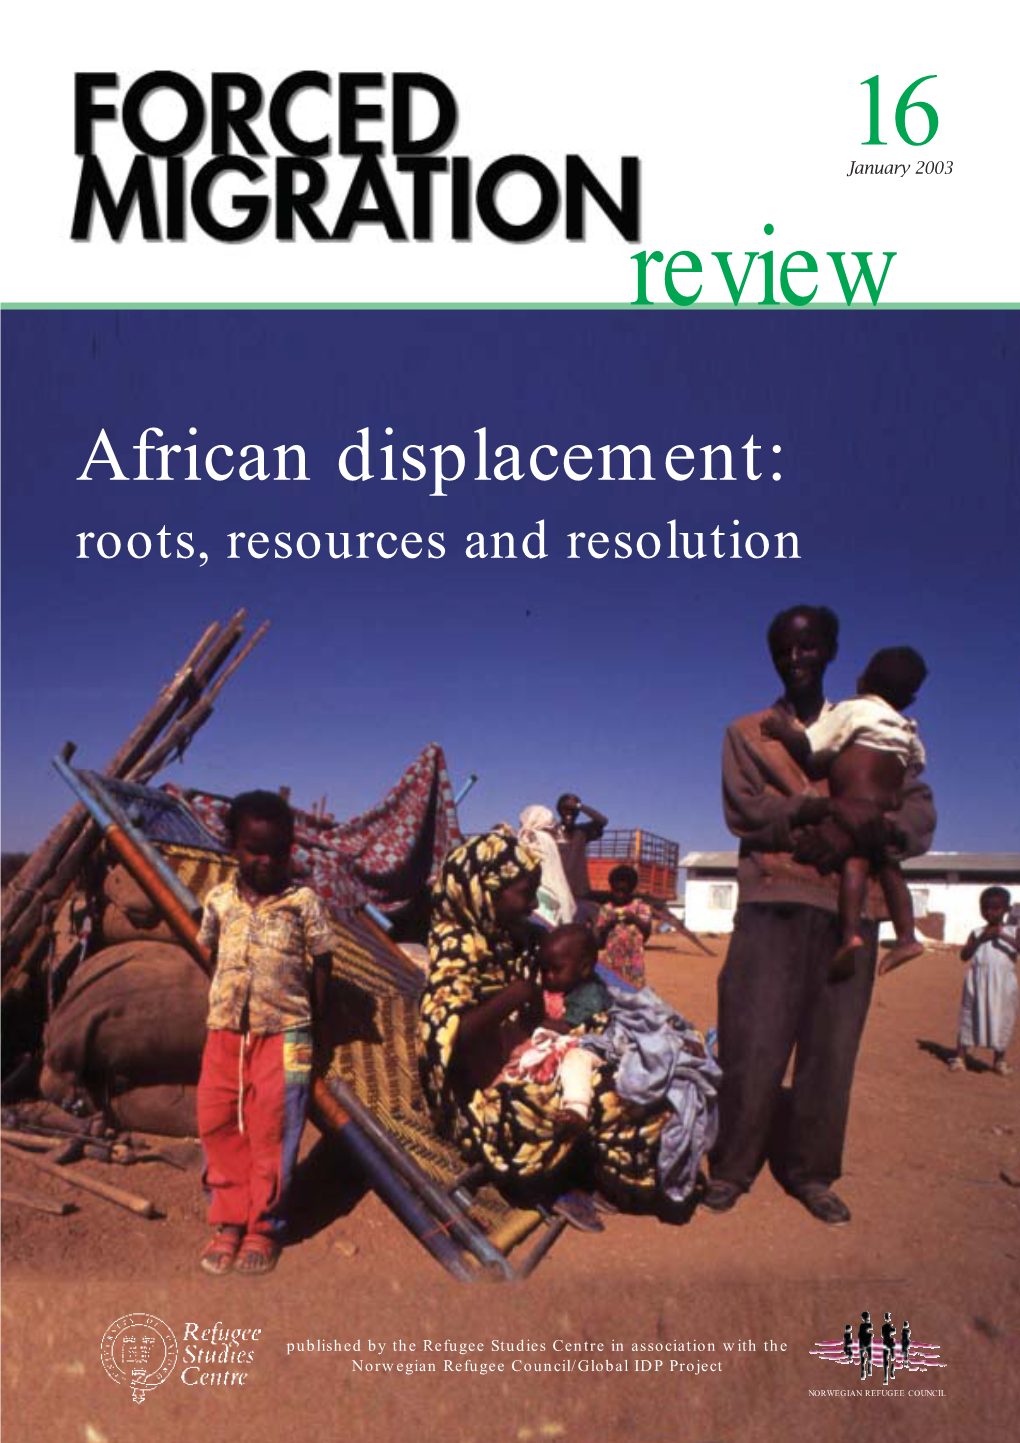 FMR 16, with Its Researchers, Refugees and Internally Displaced People, Afeature Section on African Displace- and Those Who Work with Them